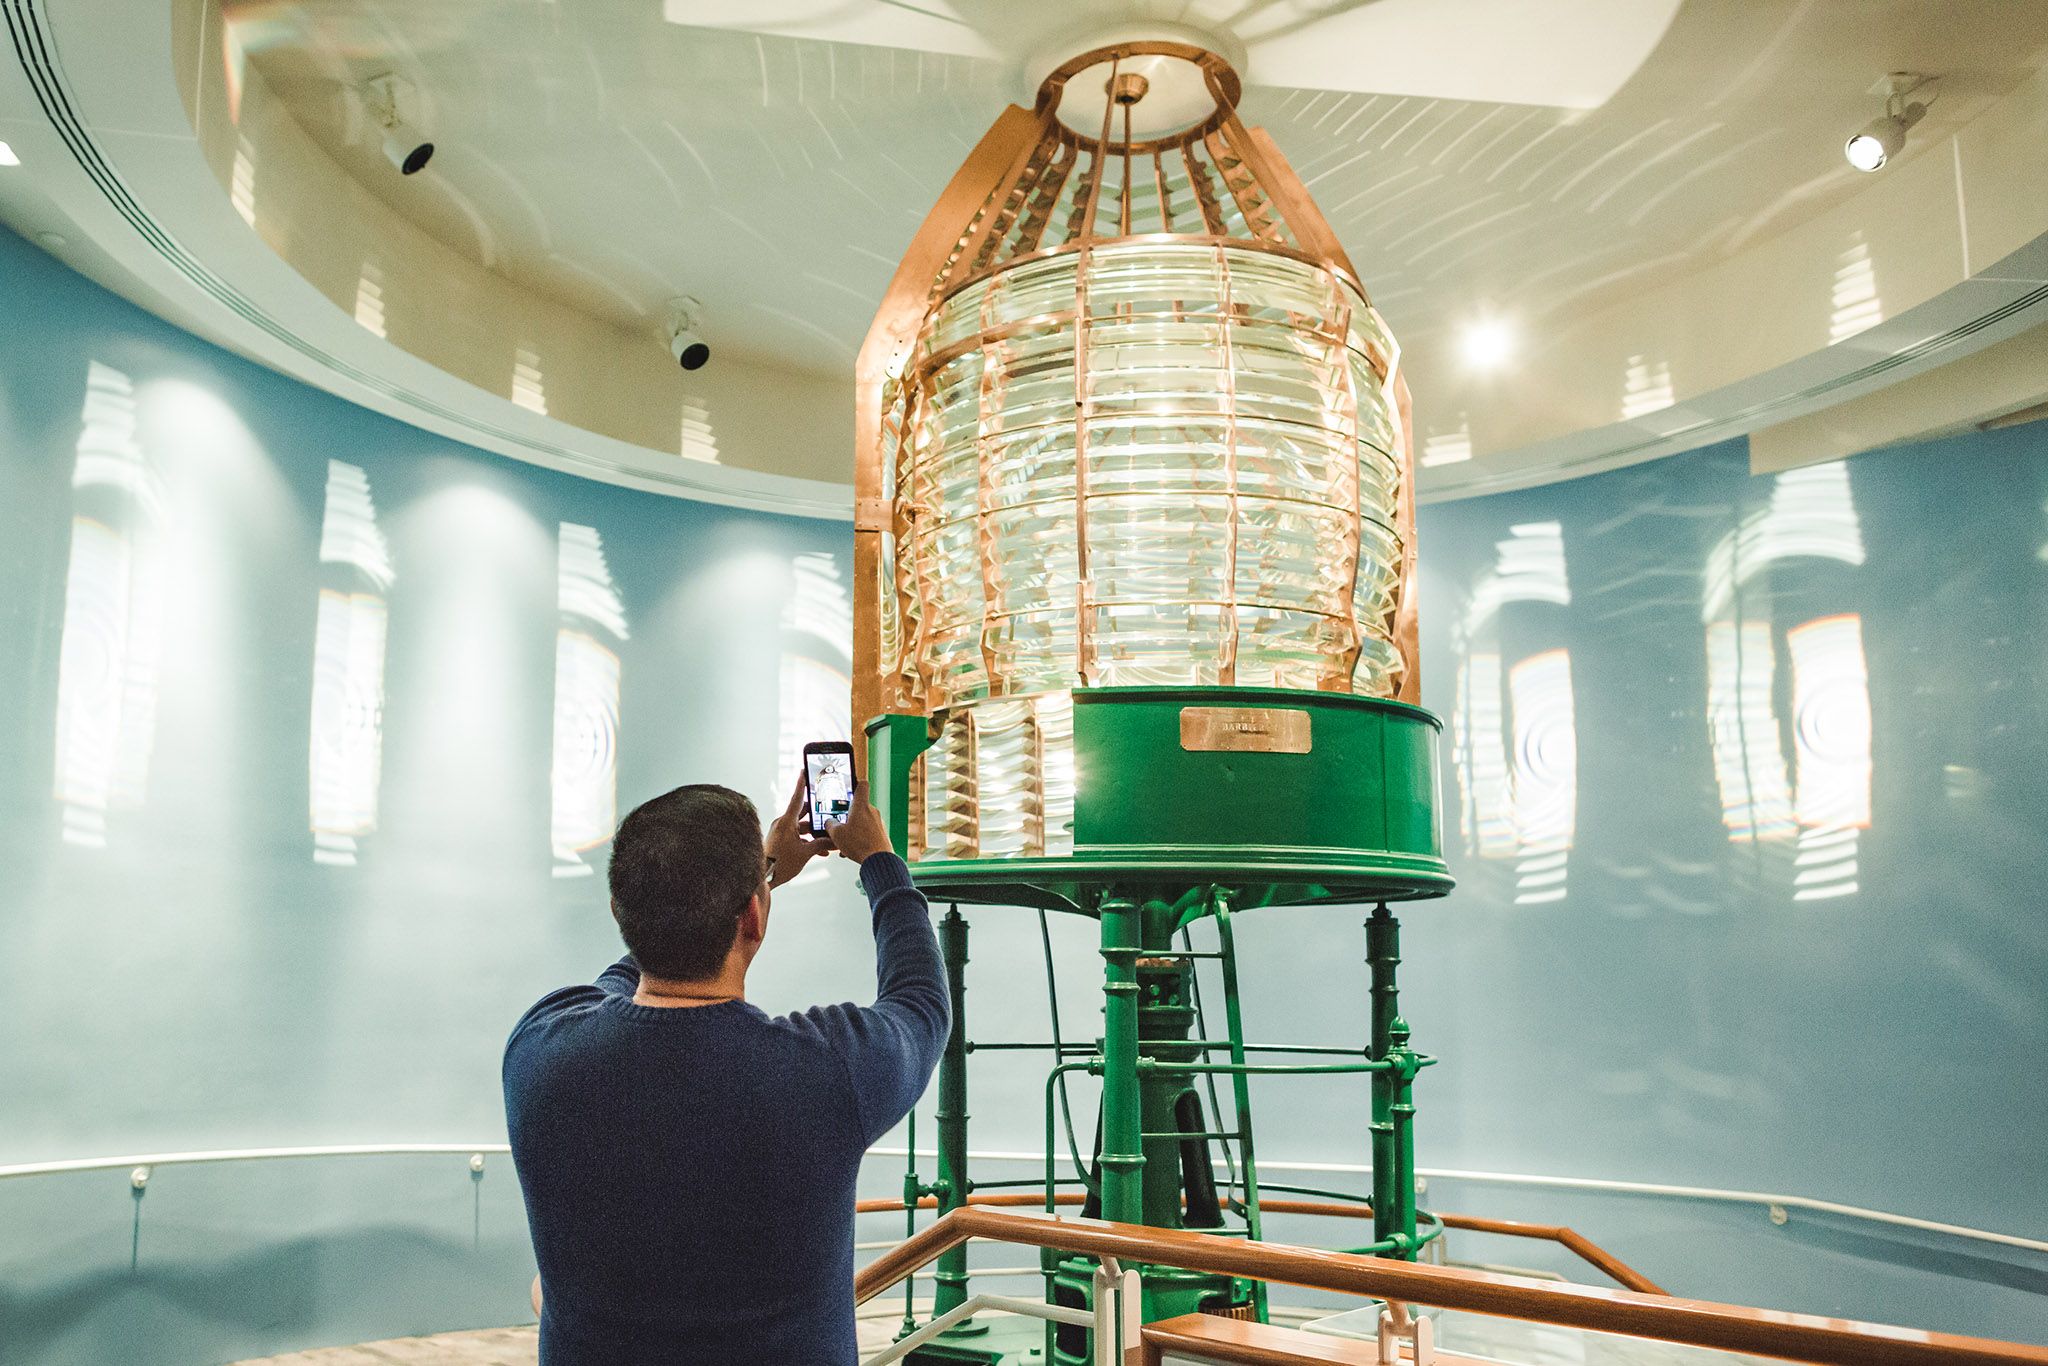 Man taking a photo of lighthouse lens with his phone.